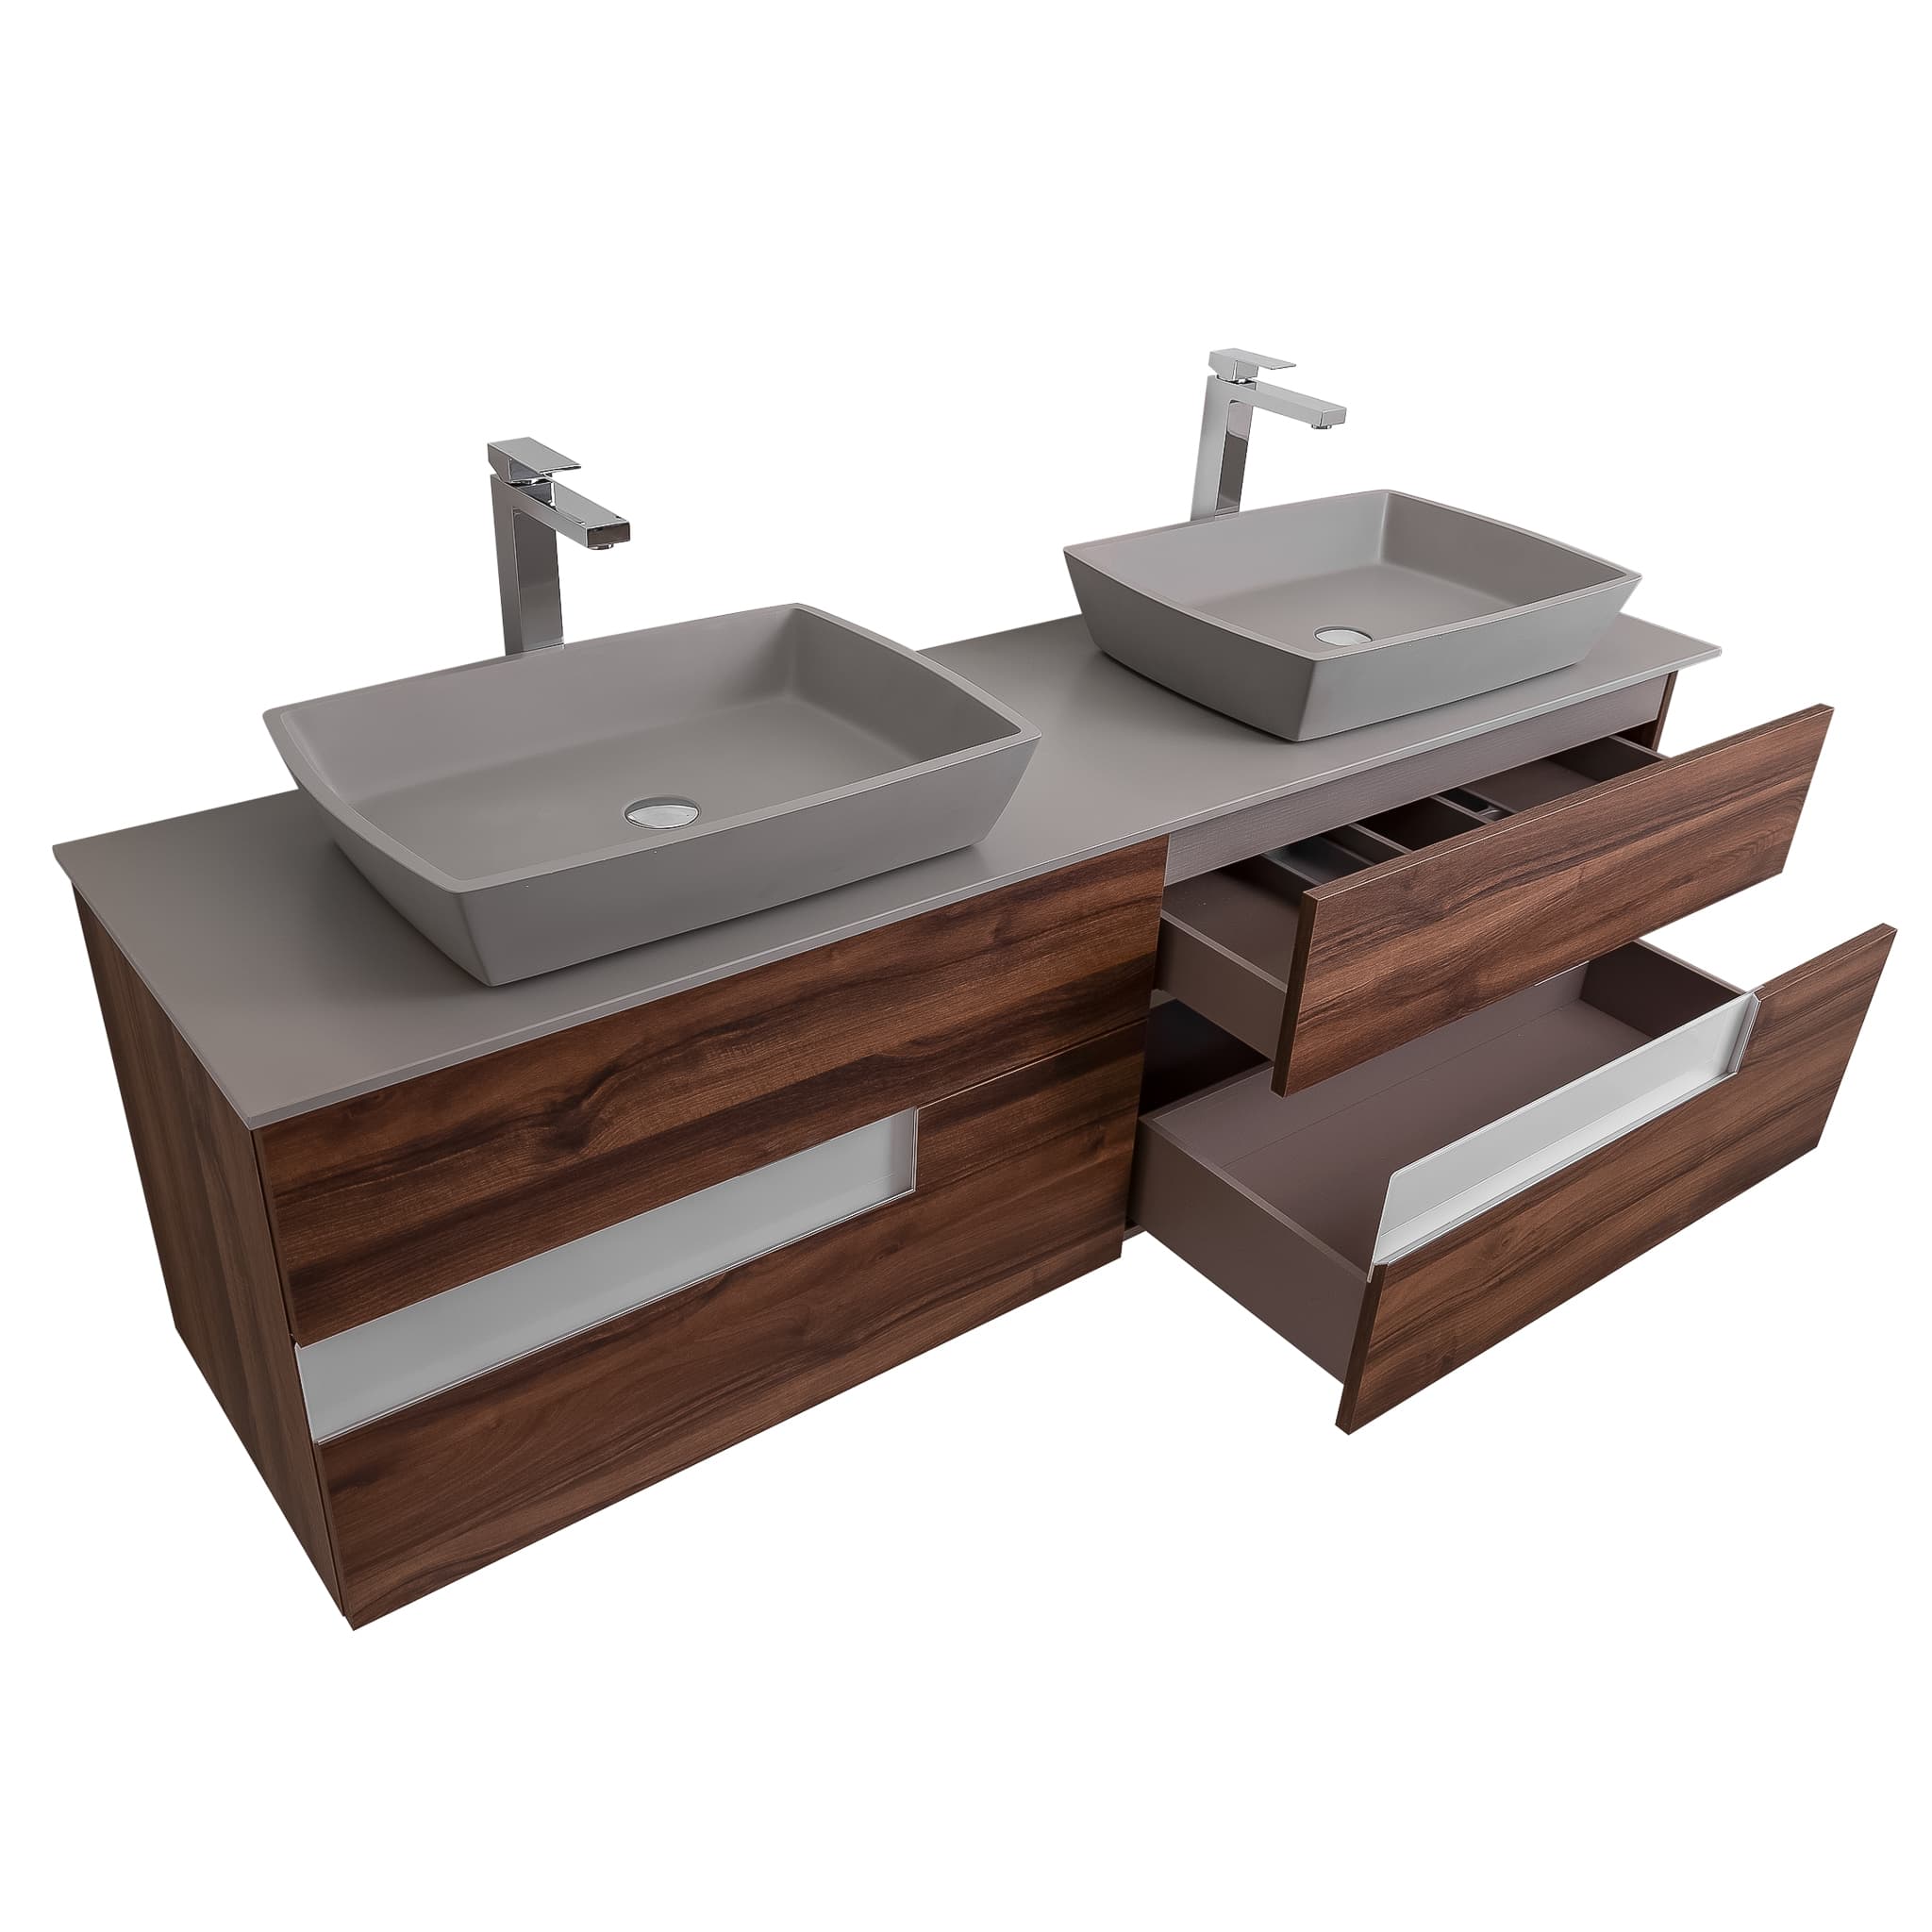 Vision 72 Valenti Medium Brown Wood Cabinet, Solid Surface Flat Grey Counter And Two Square Solid Surface Grey Basin 1316, Wall Mounted Modern Vanity Set